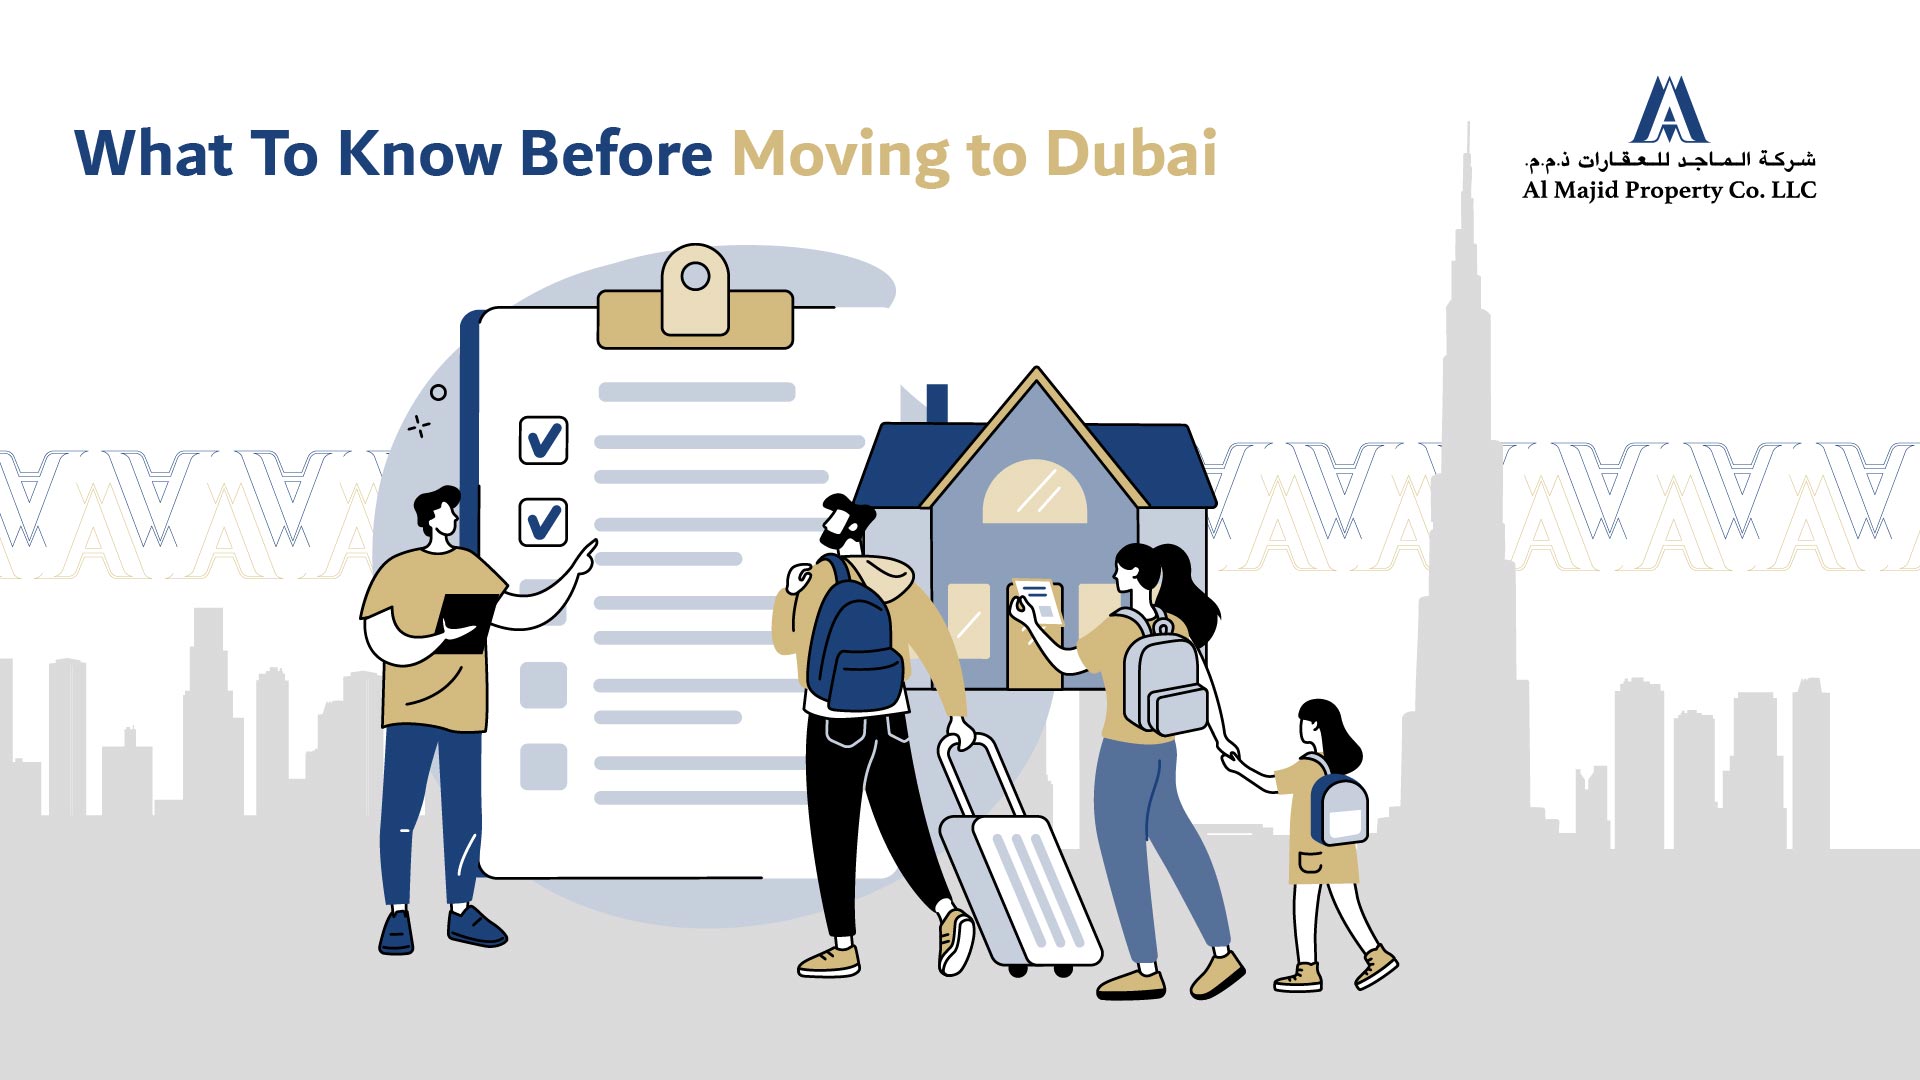 What To Know Before Moving to Dubai